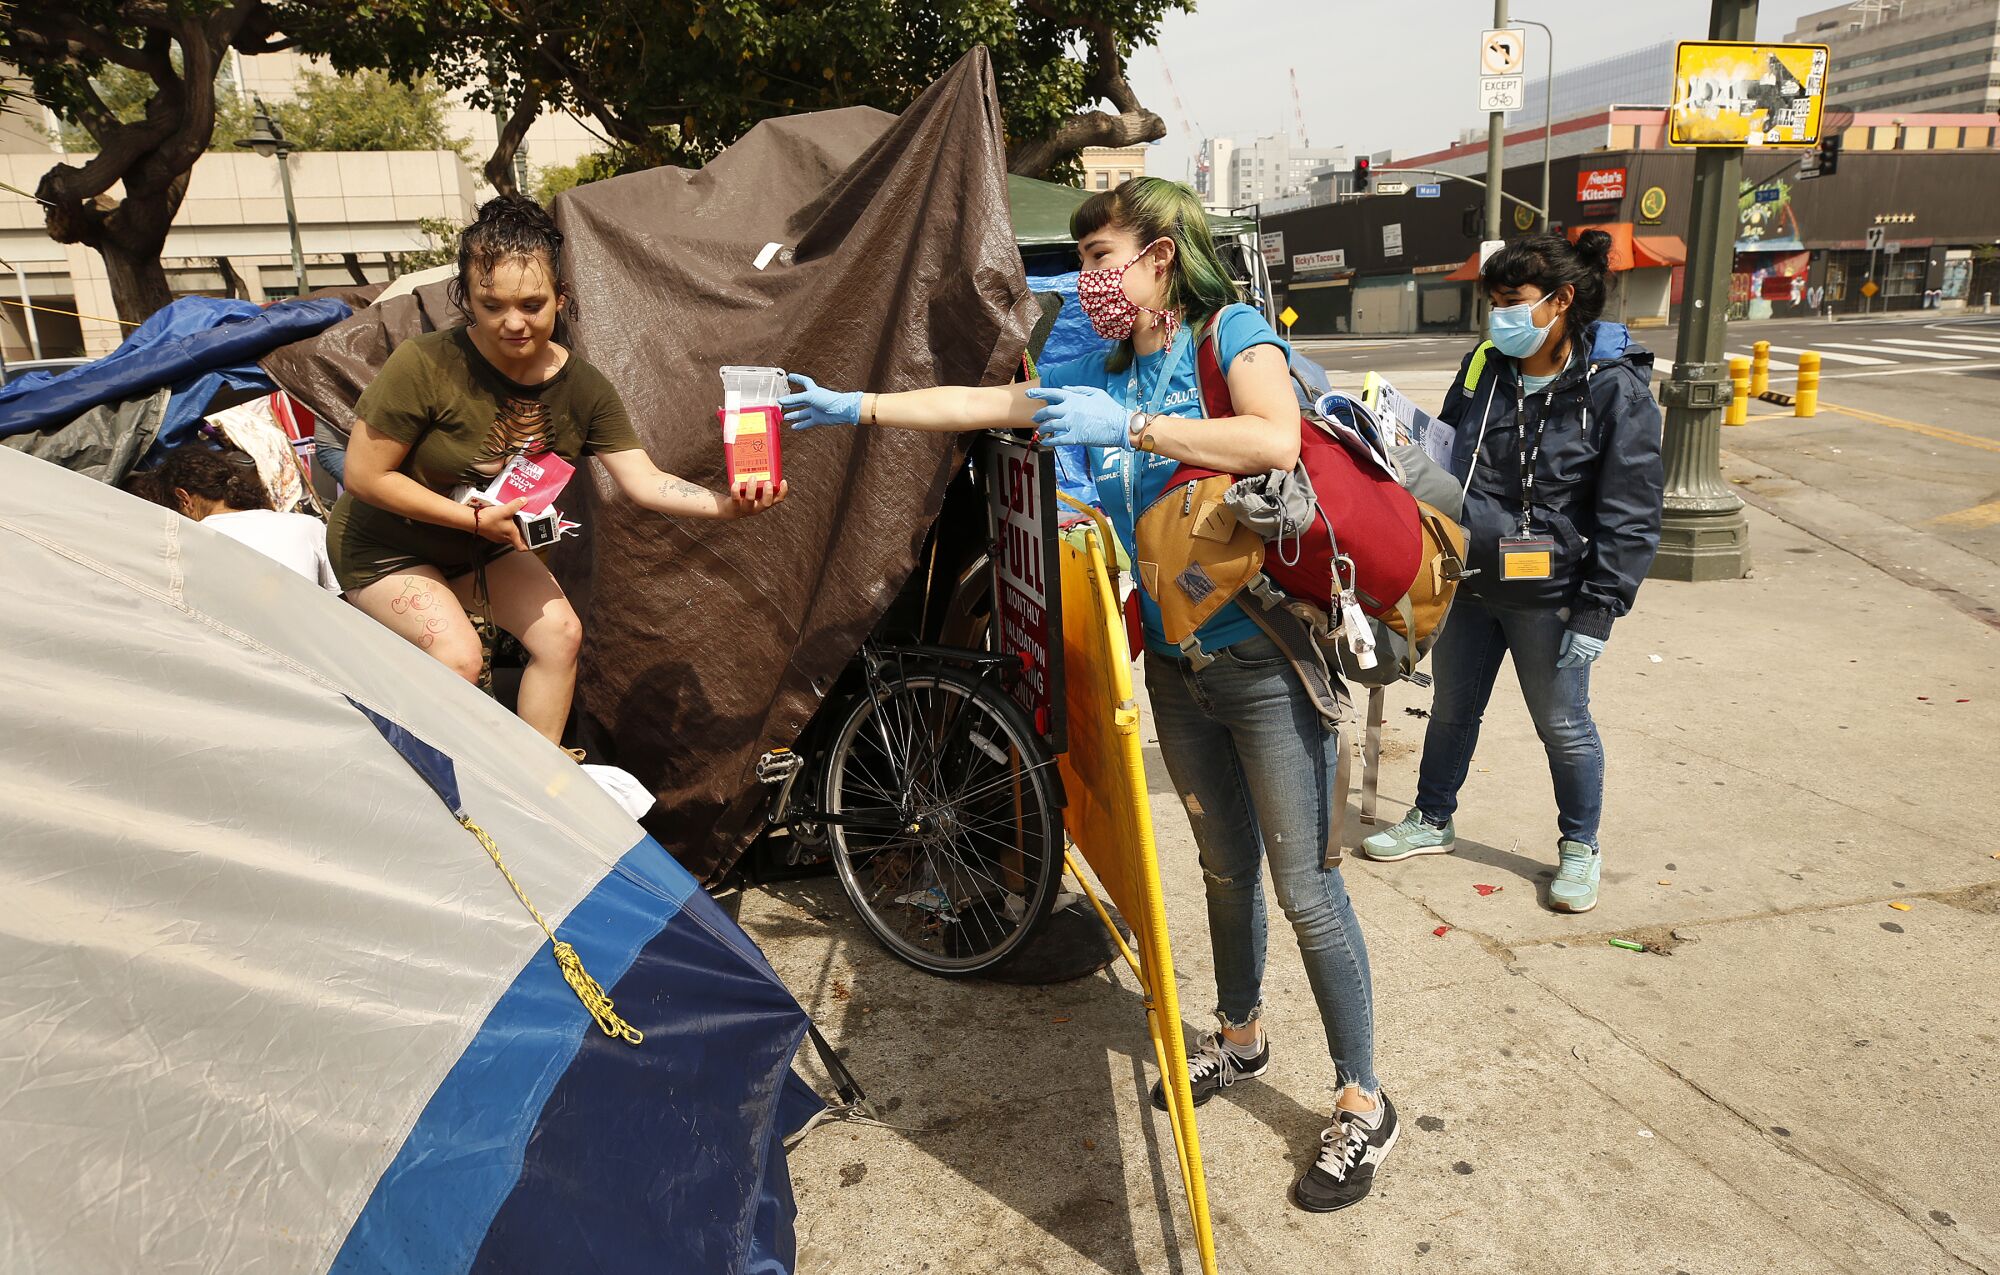 Outreach worker Ciara DeVozza, right, talks with 20-year-old homeless woman on the streets of skid row in Los Angeles